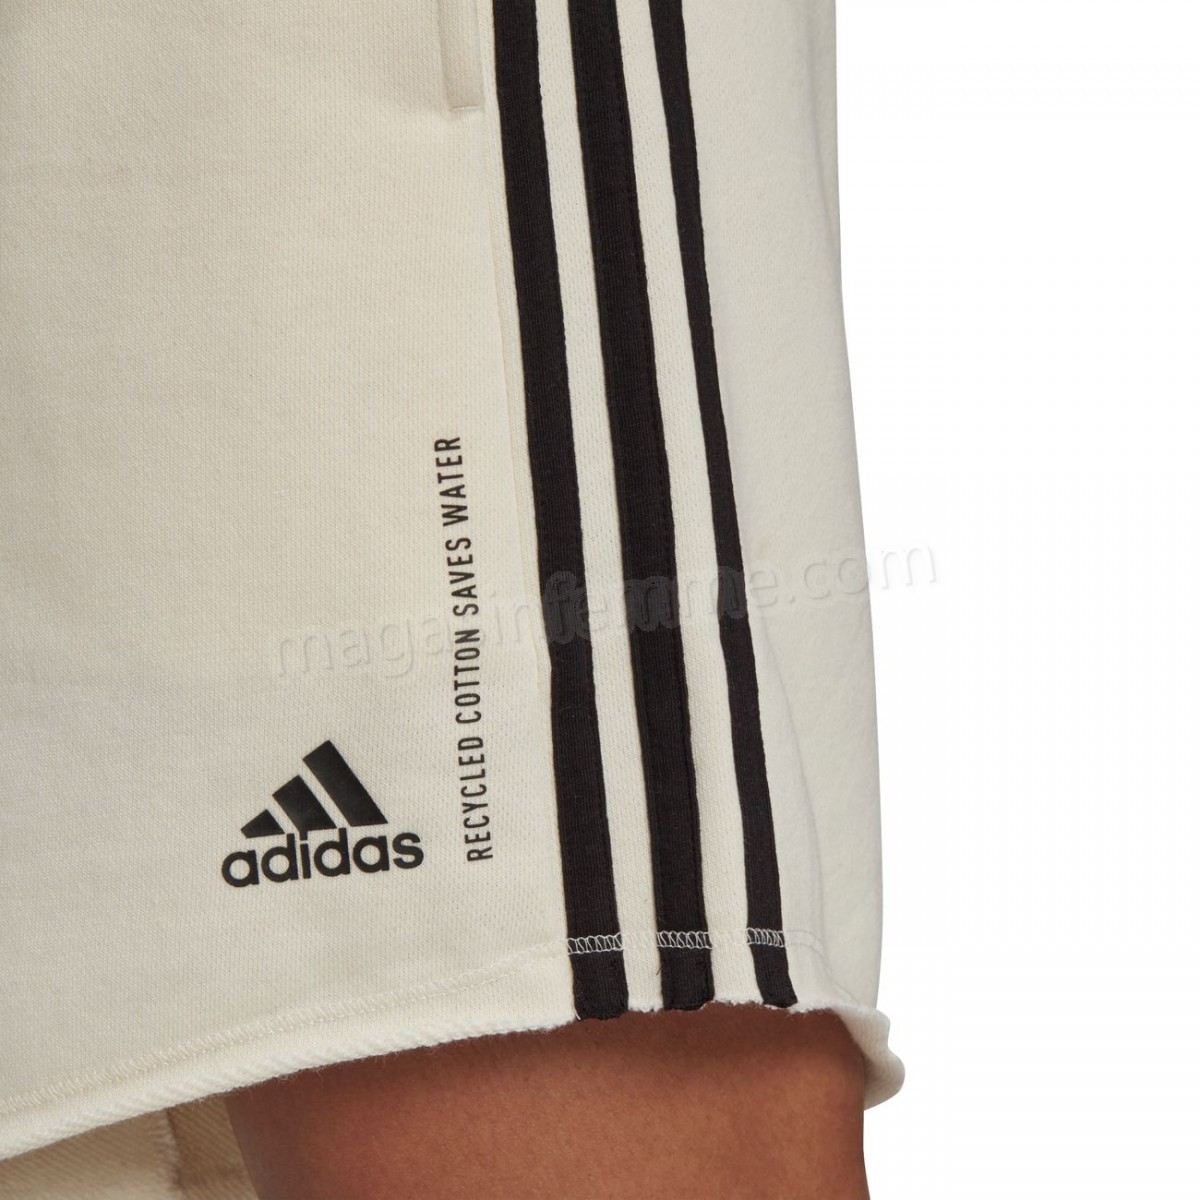 Adidas-Fitness femme ADIDAS Short femme adidas Must Haves Recycled Cotton en solde - -7